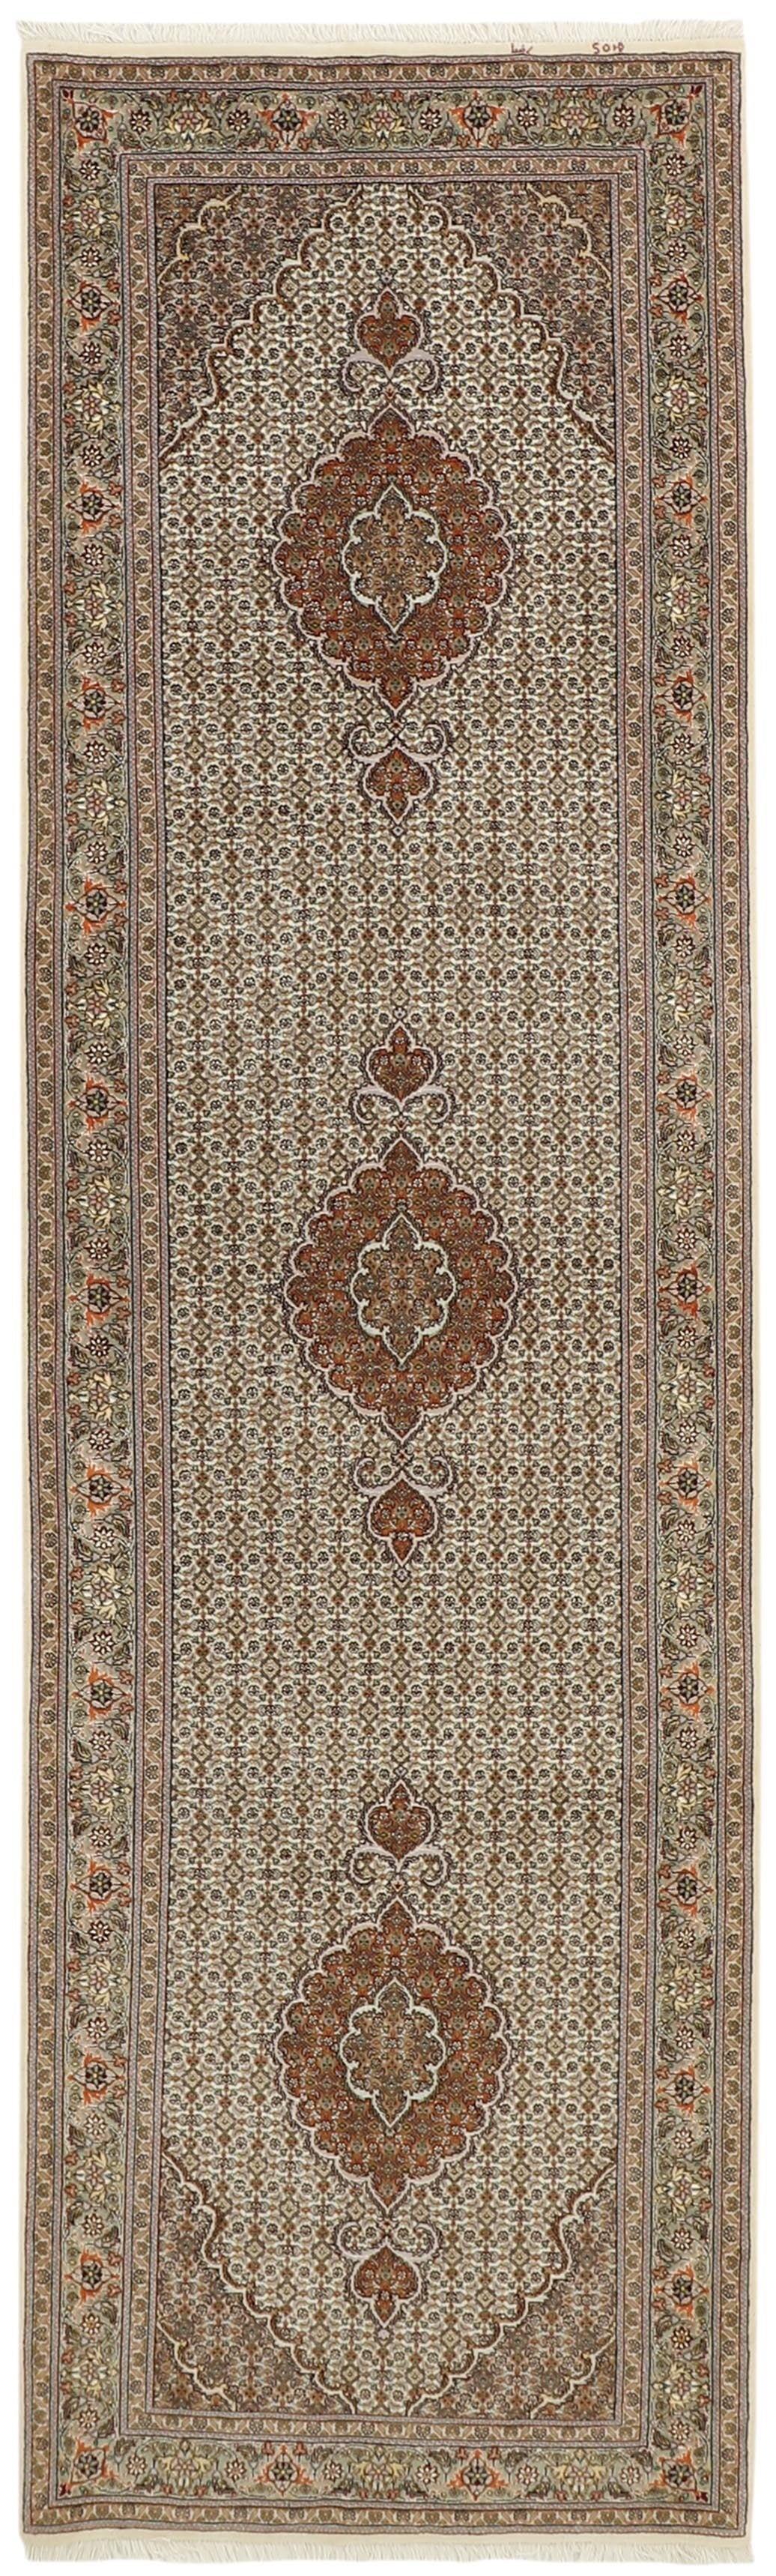 Authentic persian runner with traditional floral design in red, beige and brown